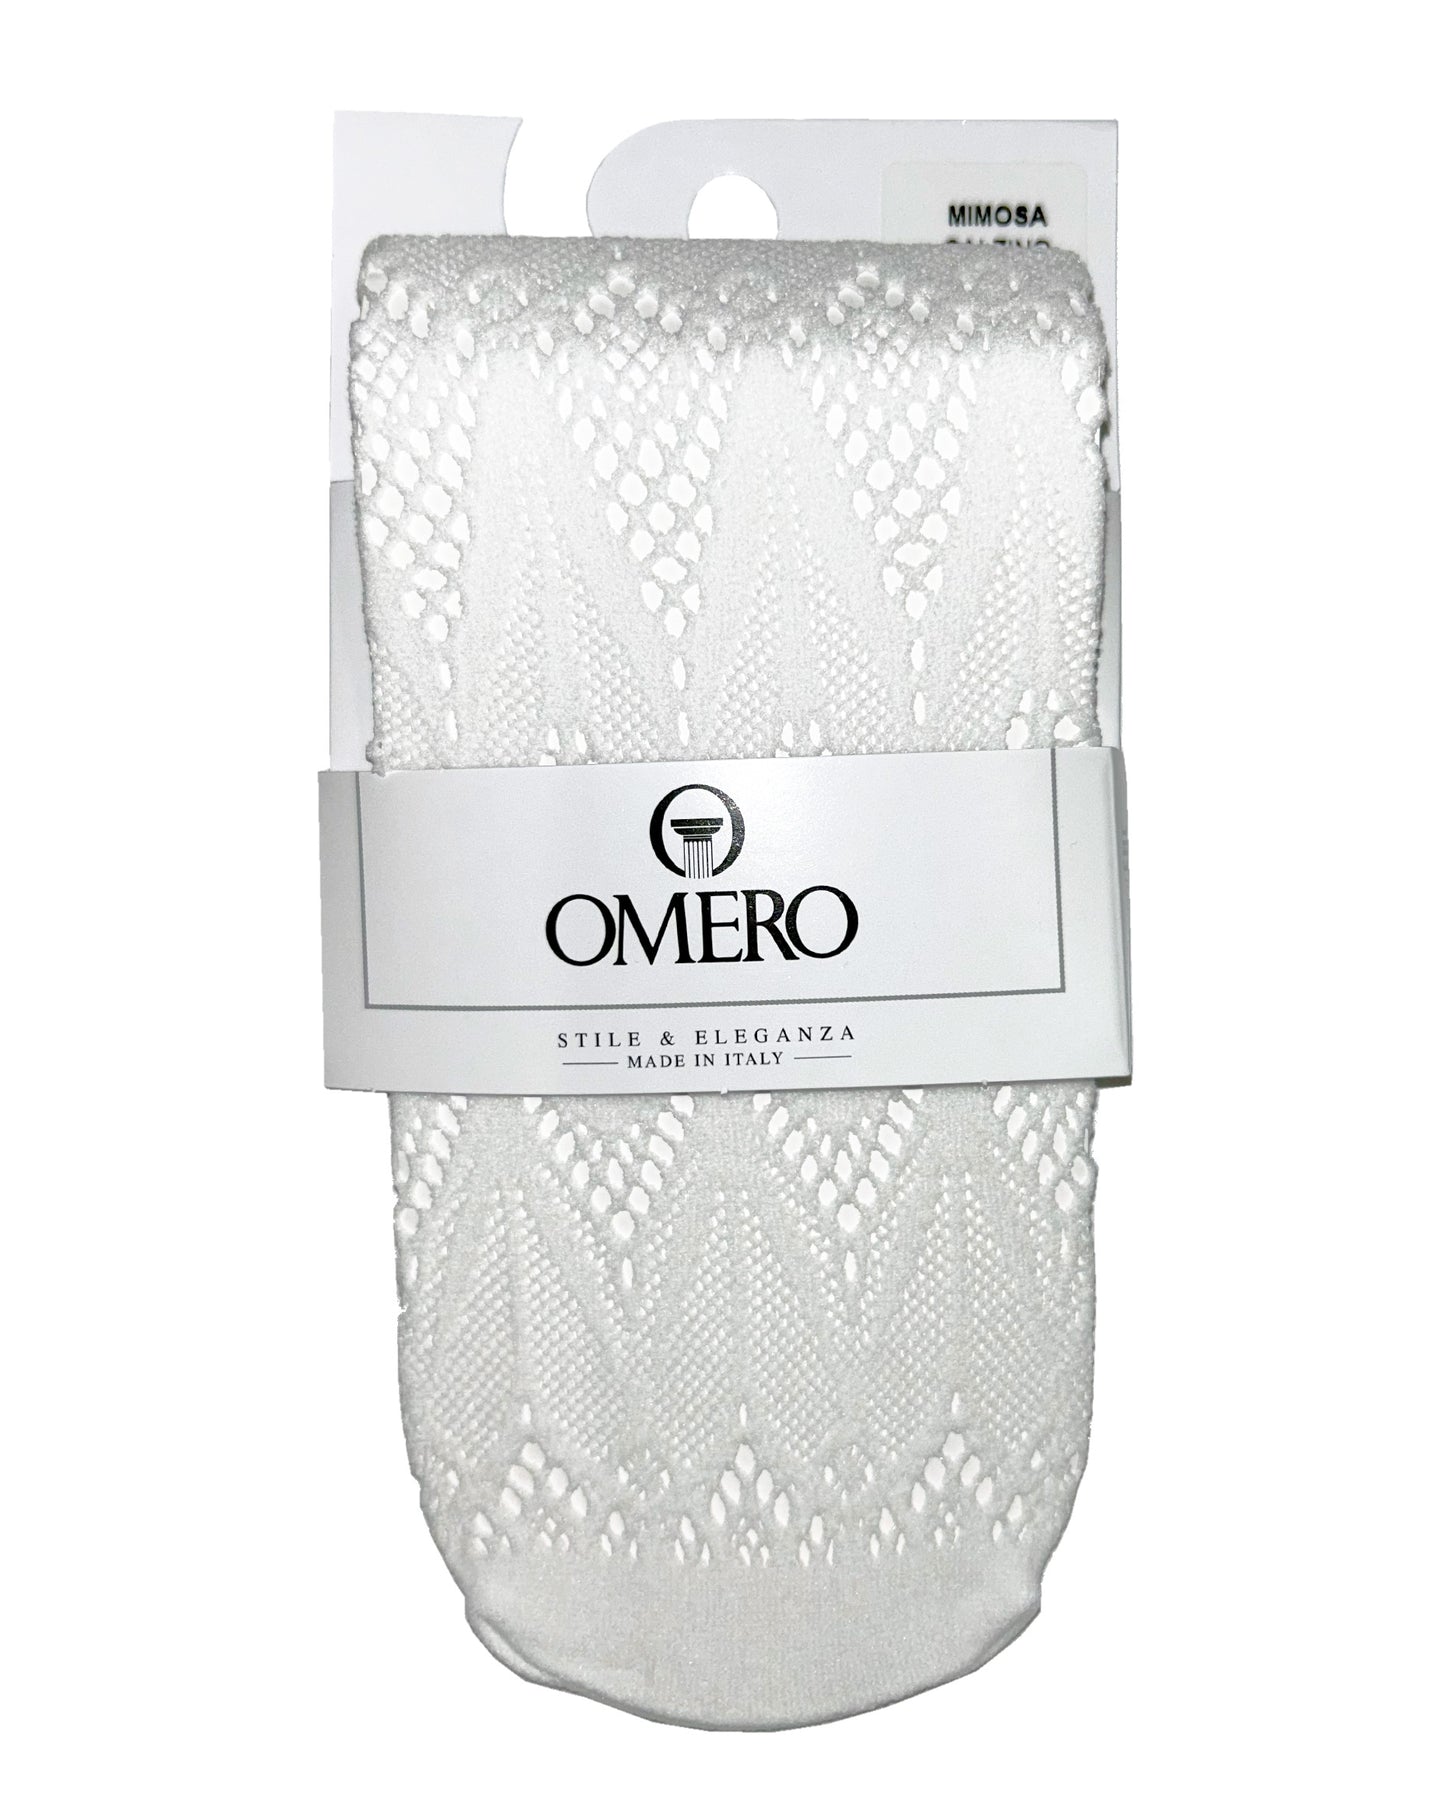 Omero Mimosa Calzino Pack - White laser-cut fishnet fashion ankle socks with a gothic/tribal style pattern, simple elasticated cuff and opaque toe. 